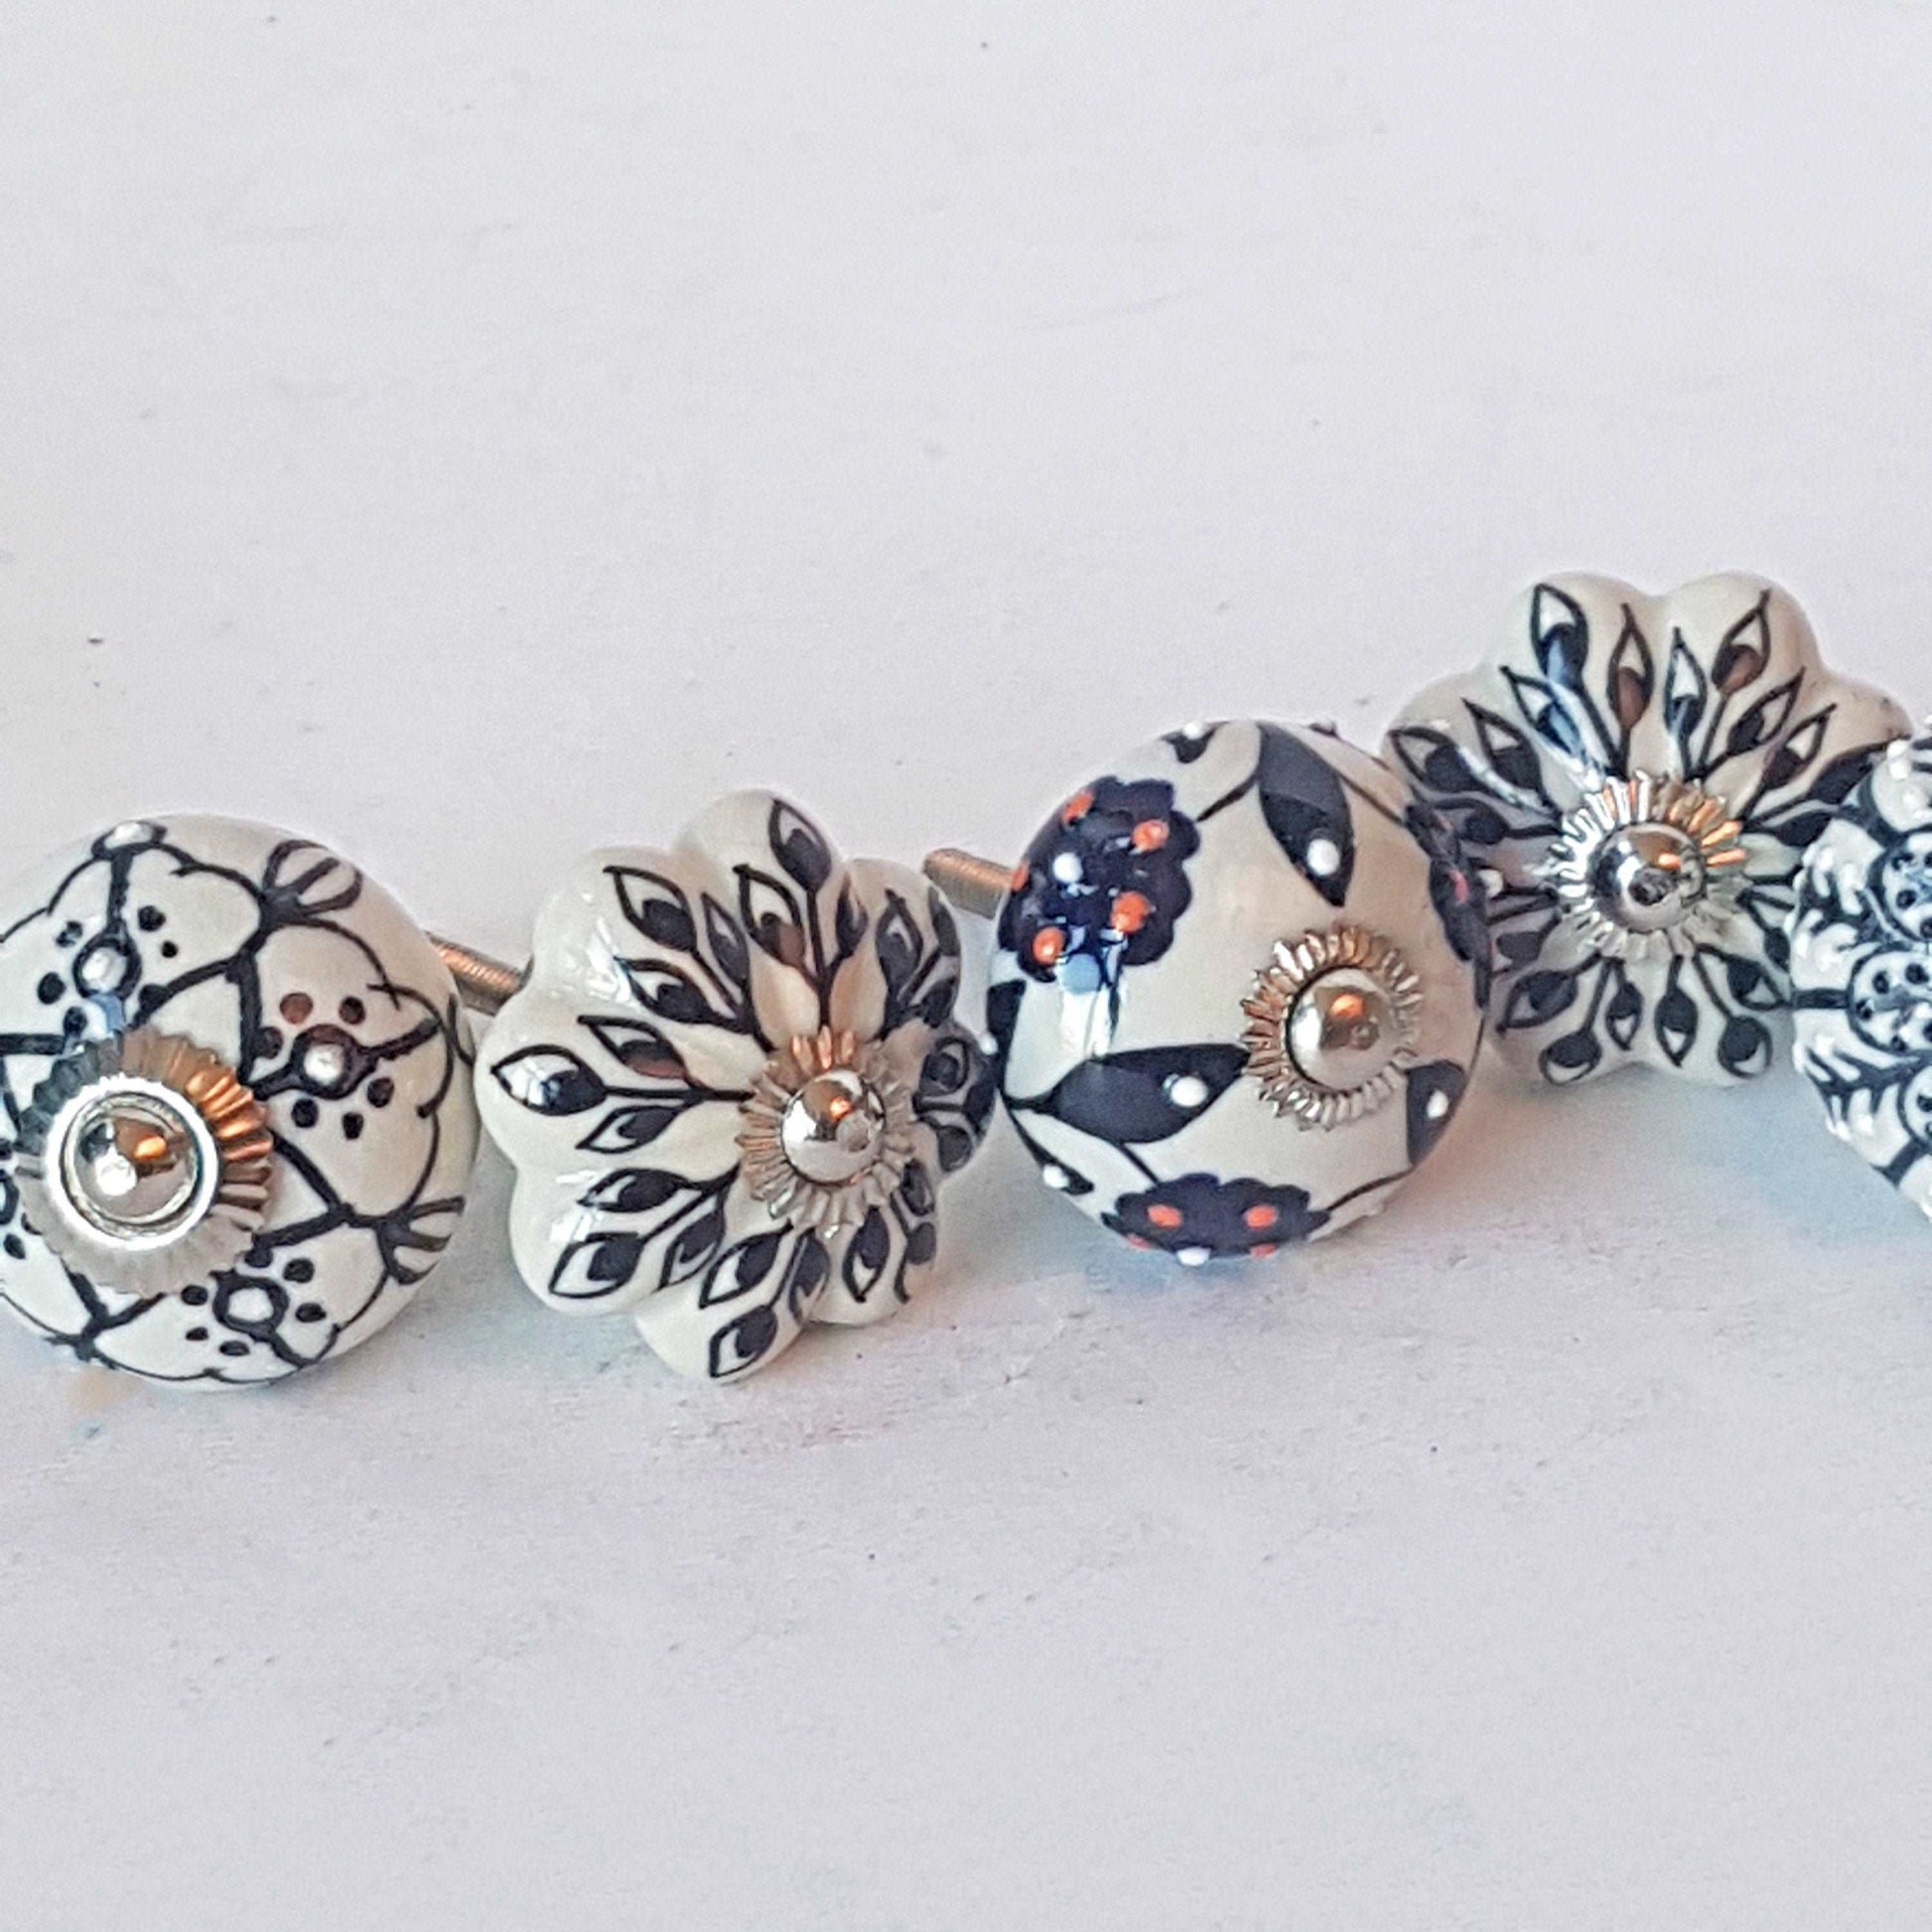 Andromeda set of 8 hand painted cabinet drawer knobs with botanical patterns in black & white.  Exclusive designer collection. In stock now! - Vintage India Ca